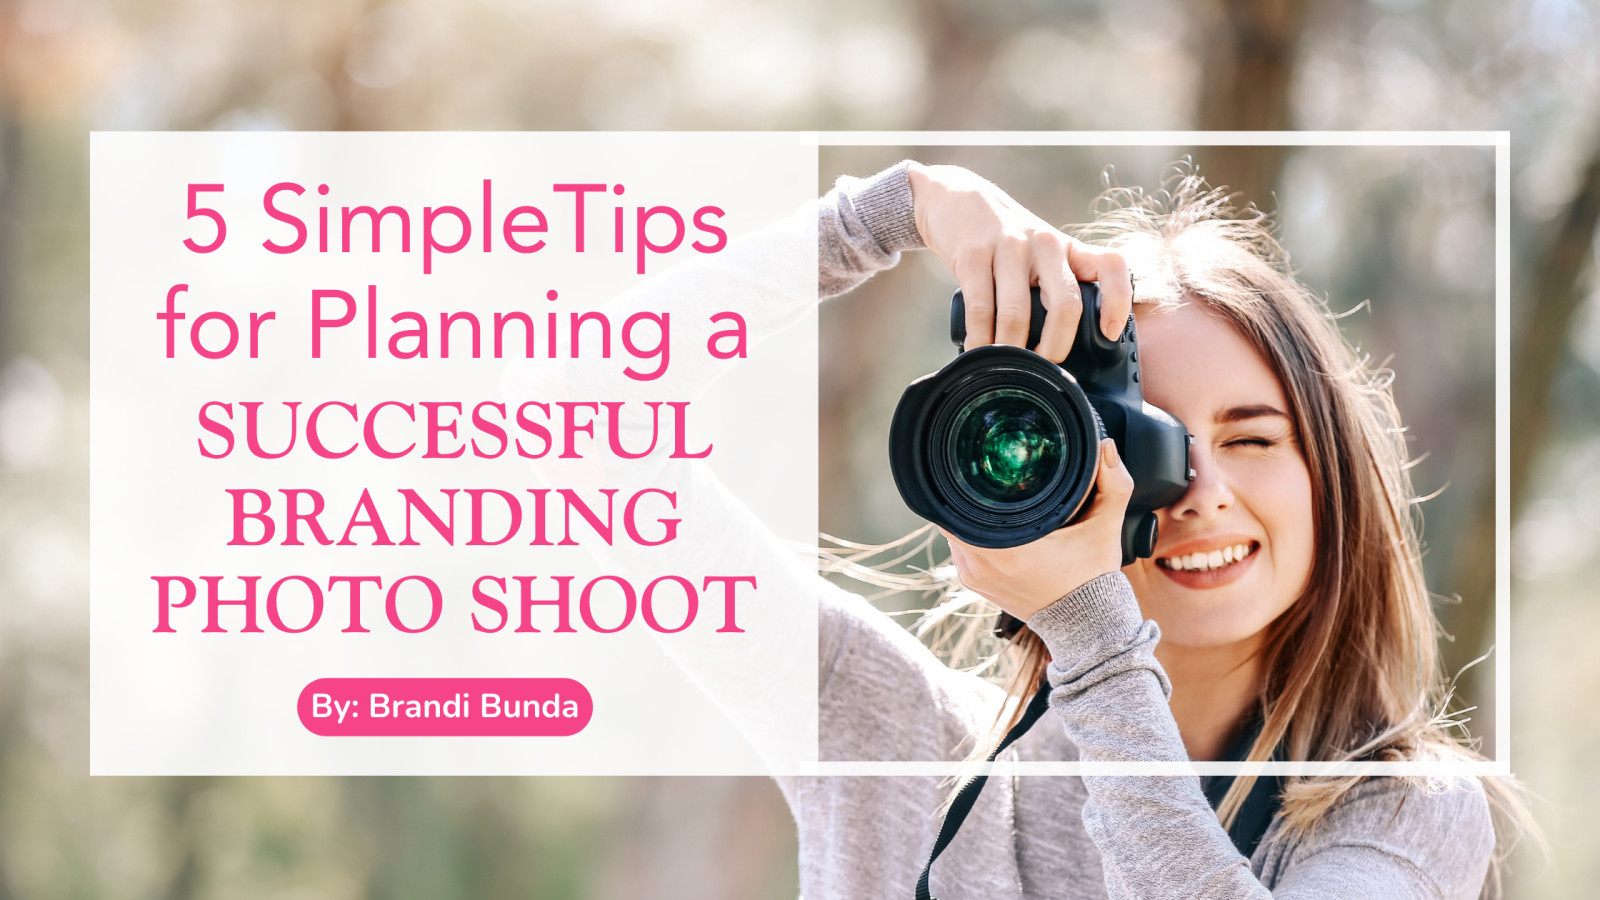 Tips for Planning a Successful Branding Photoshoot